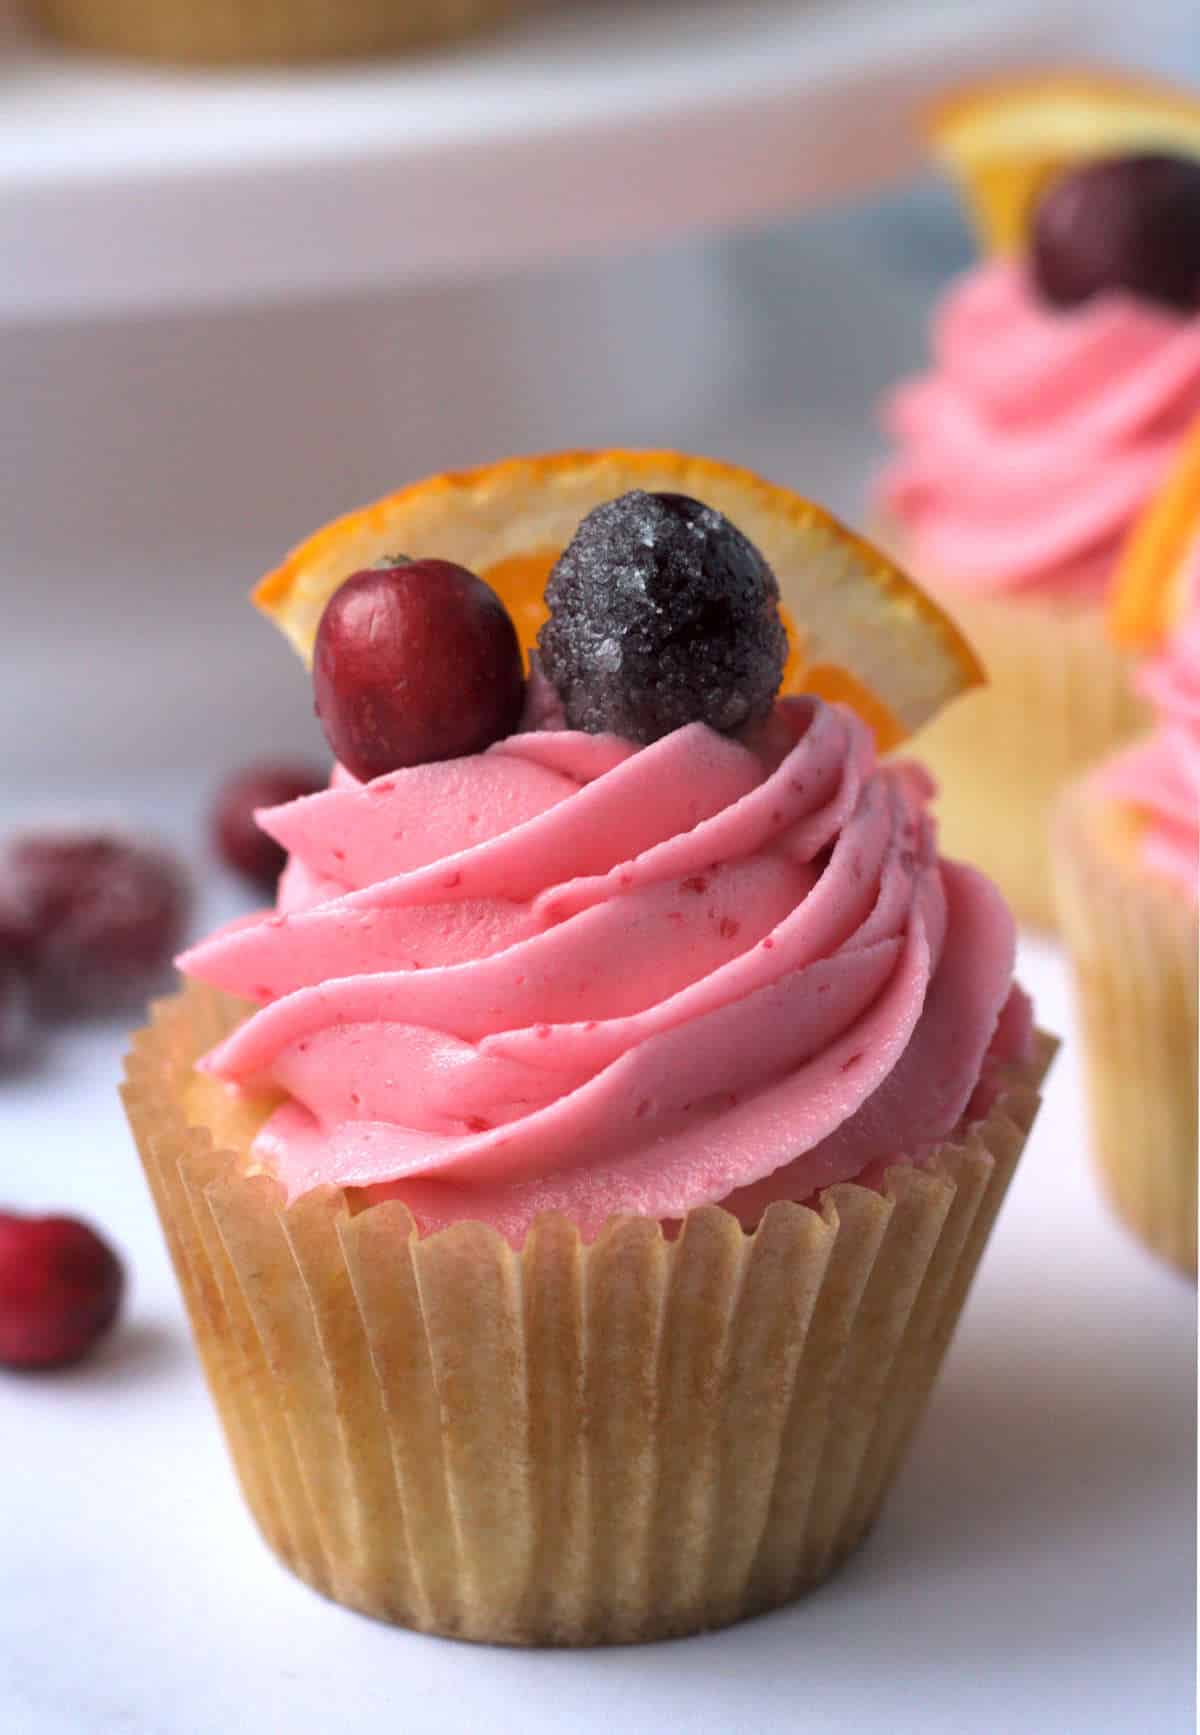 A cupcake with pink frosting.  It's decorated with an orange slice and two cranberries, one of which is sugared.